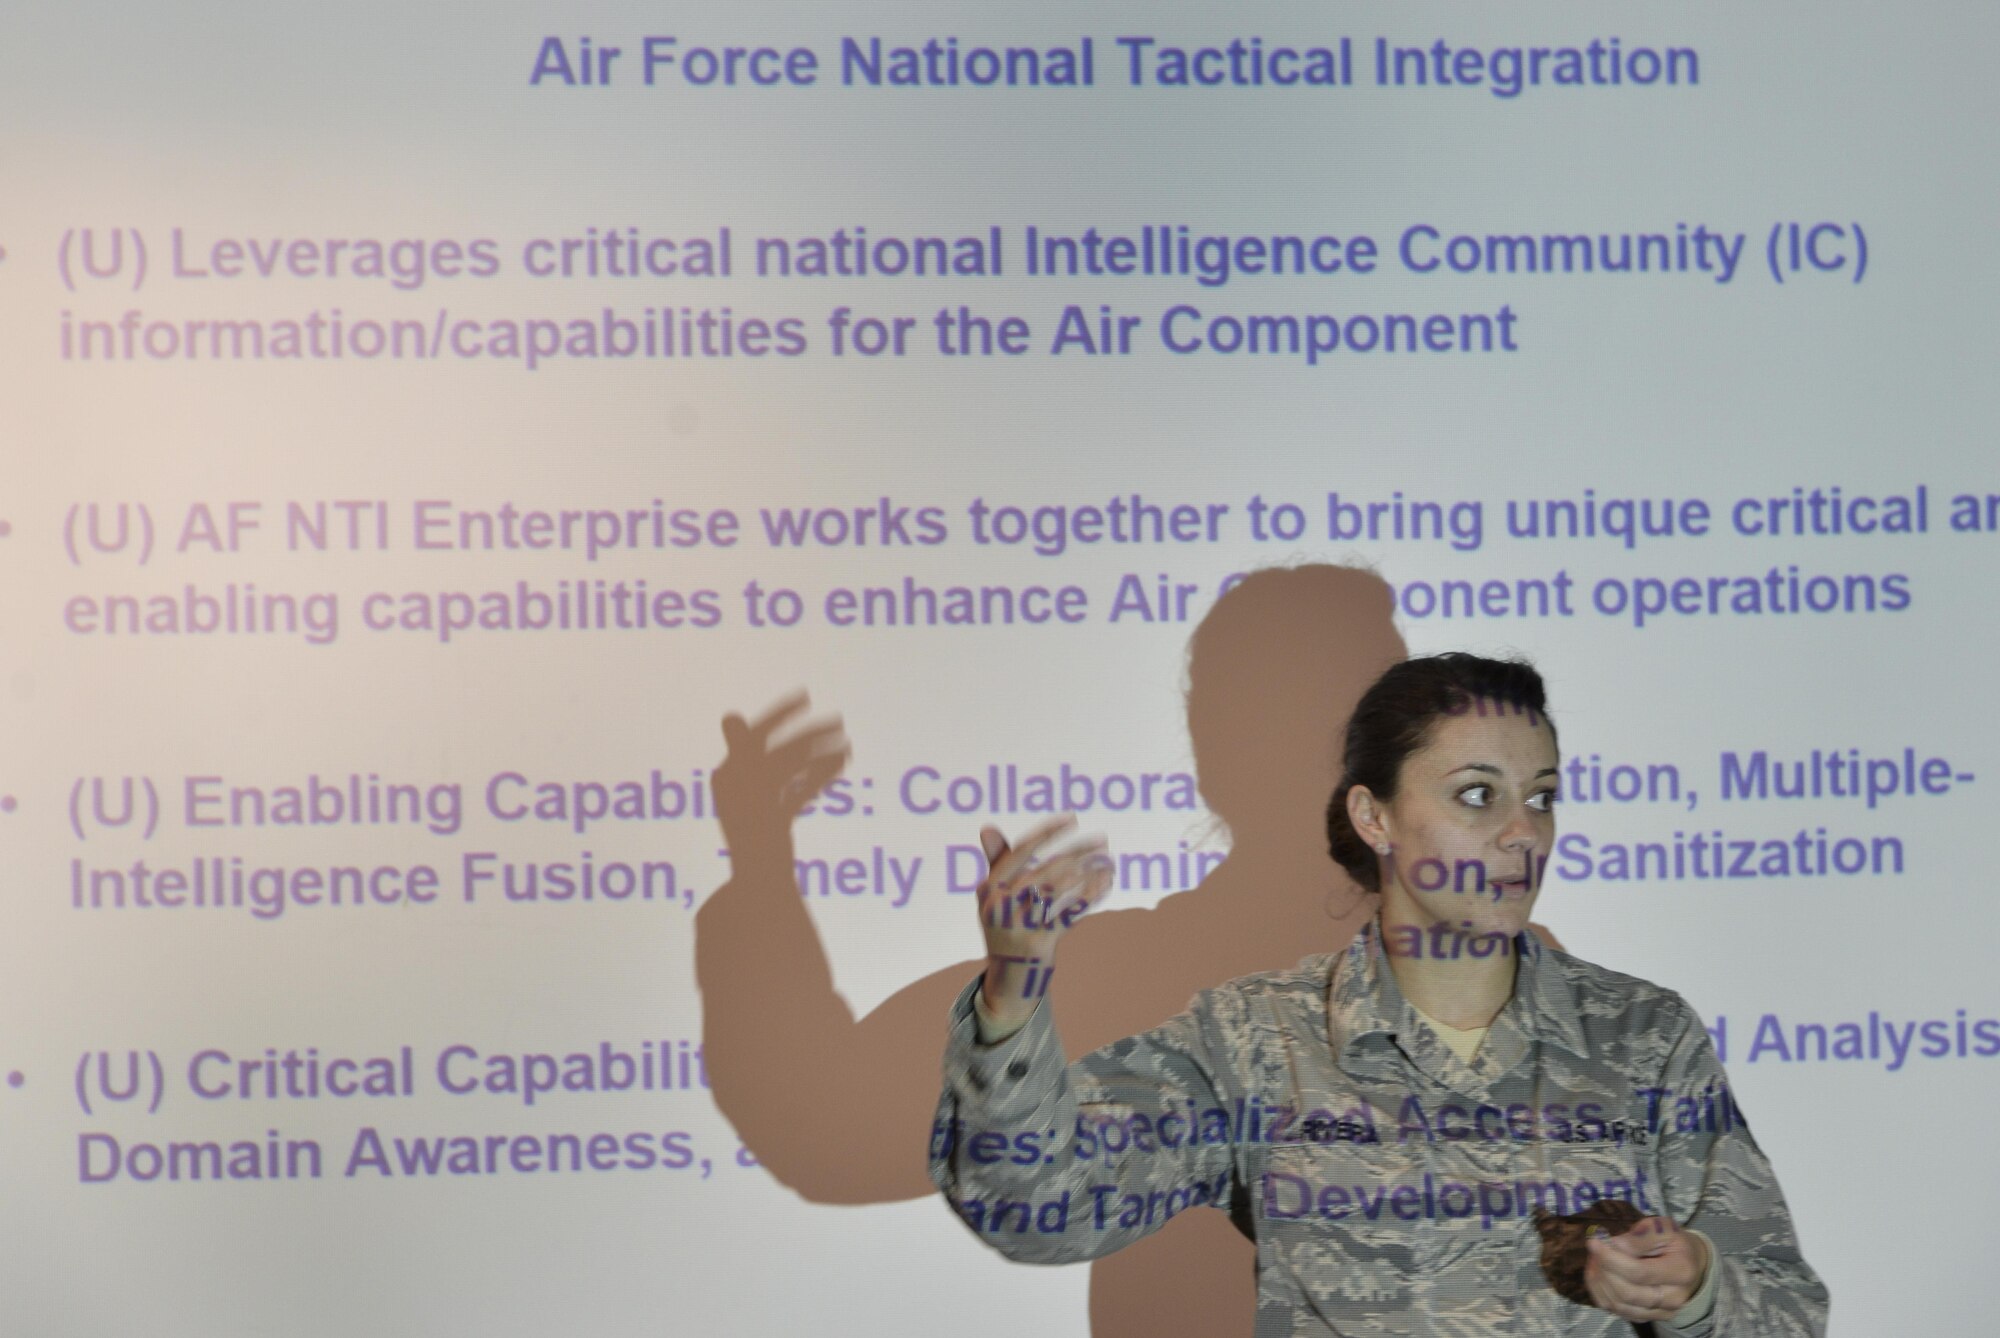 Staff Sgt. Bazil Rivera 70th Operations Support Squadron Air Force National Tactical Integration non-commissioned officer in charge, explains the importance of NTI training to students training November 4, 2016 at Fort Meade, Md. AF NTI works as an enterprise that collaborates to enhance Air Component operations around the world, as well as leveraging critical nation Intelligence Community information and capabilities. (U.S. Air Force photo/Staff Sgt. Alexandre Montes)